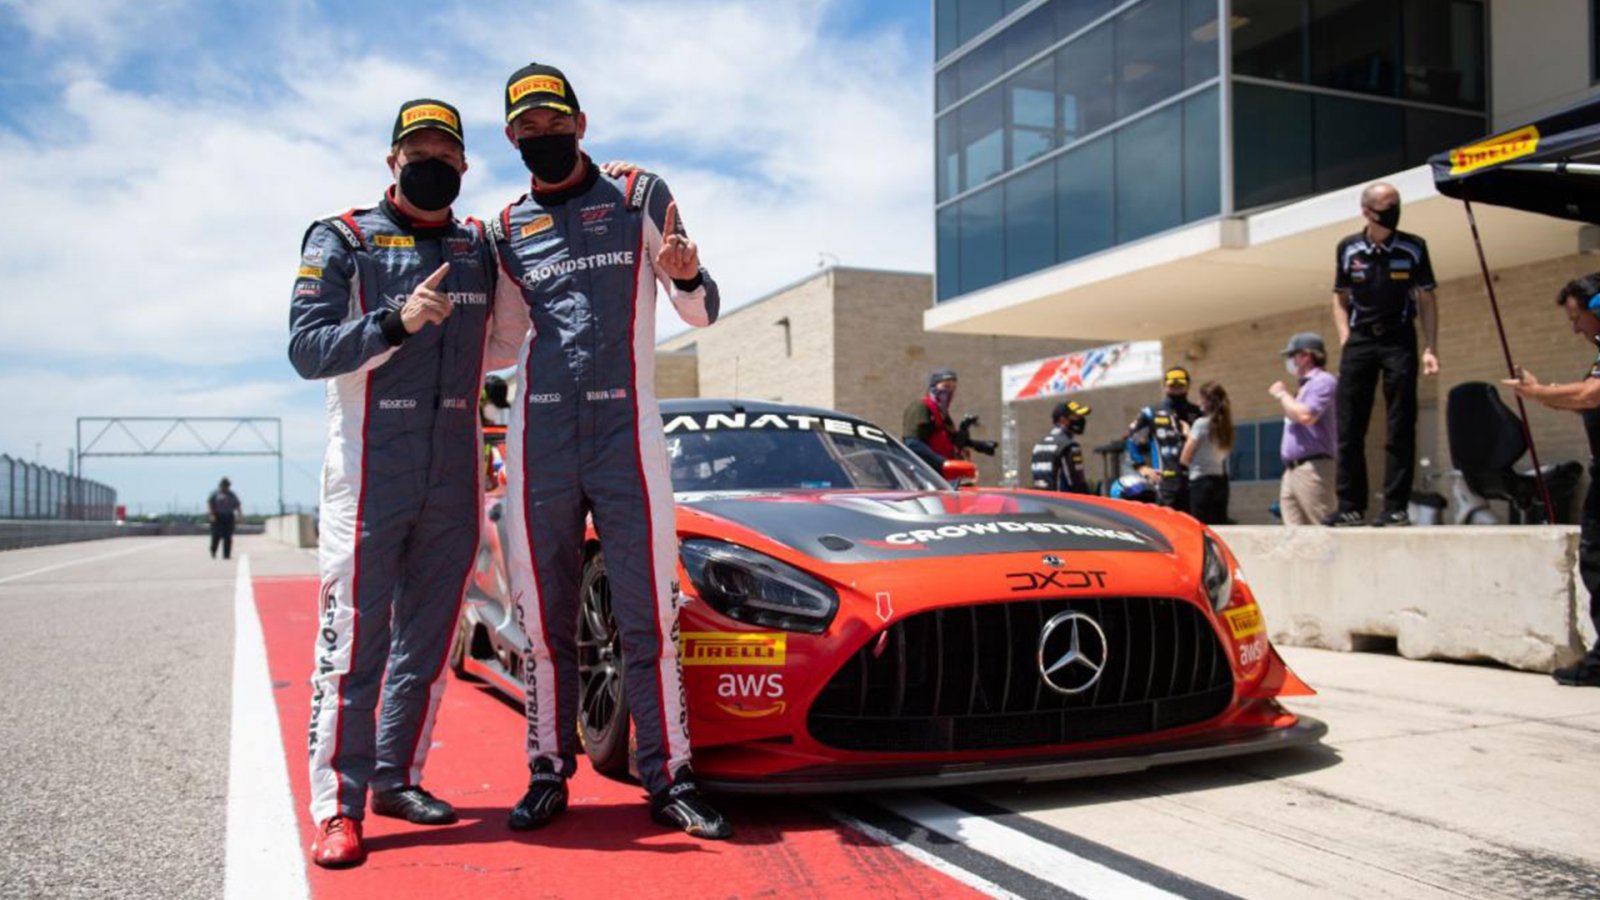 DXDT Racing Keeps Win, Podium Run Going at Circuit of the Americas